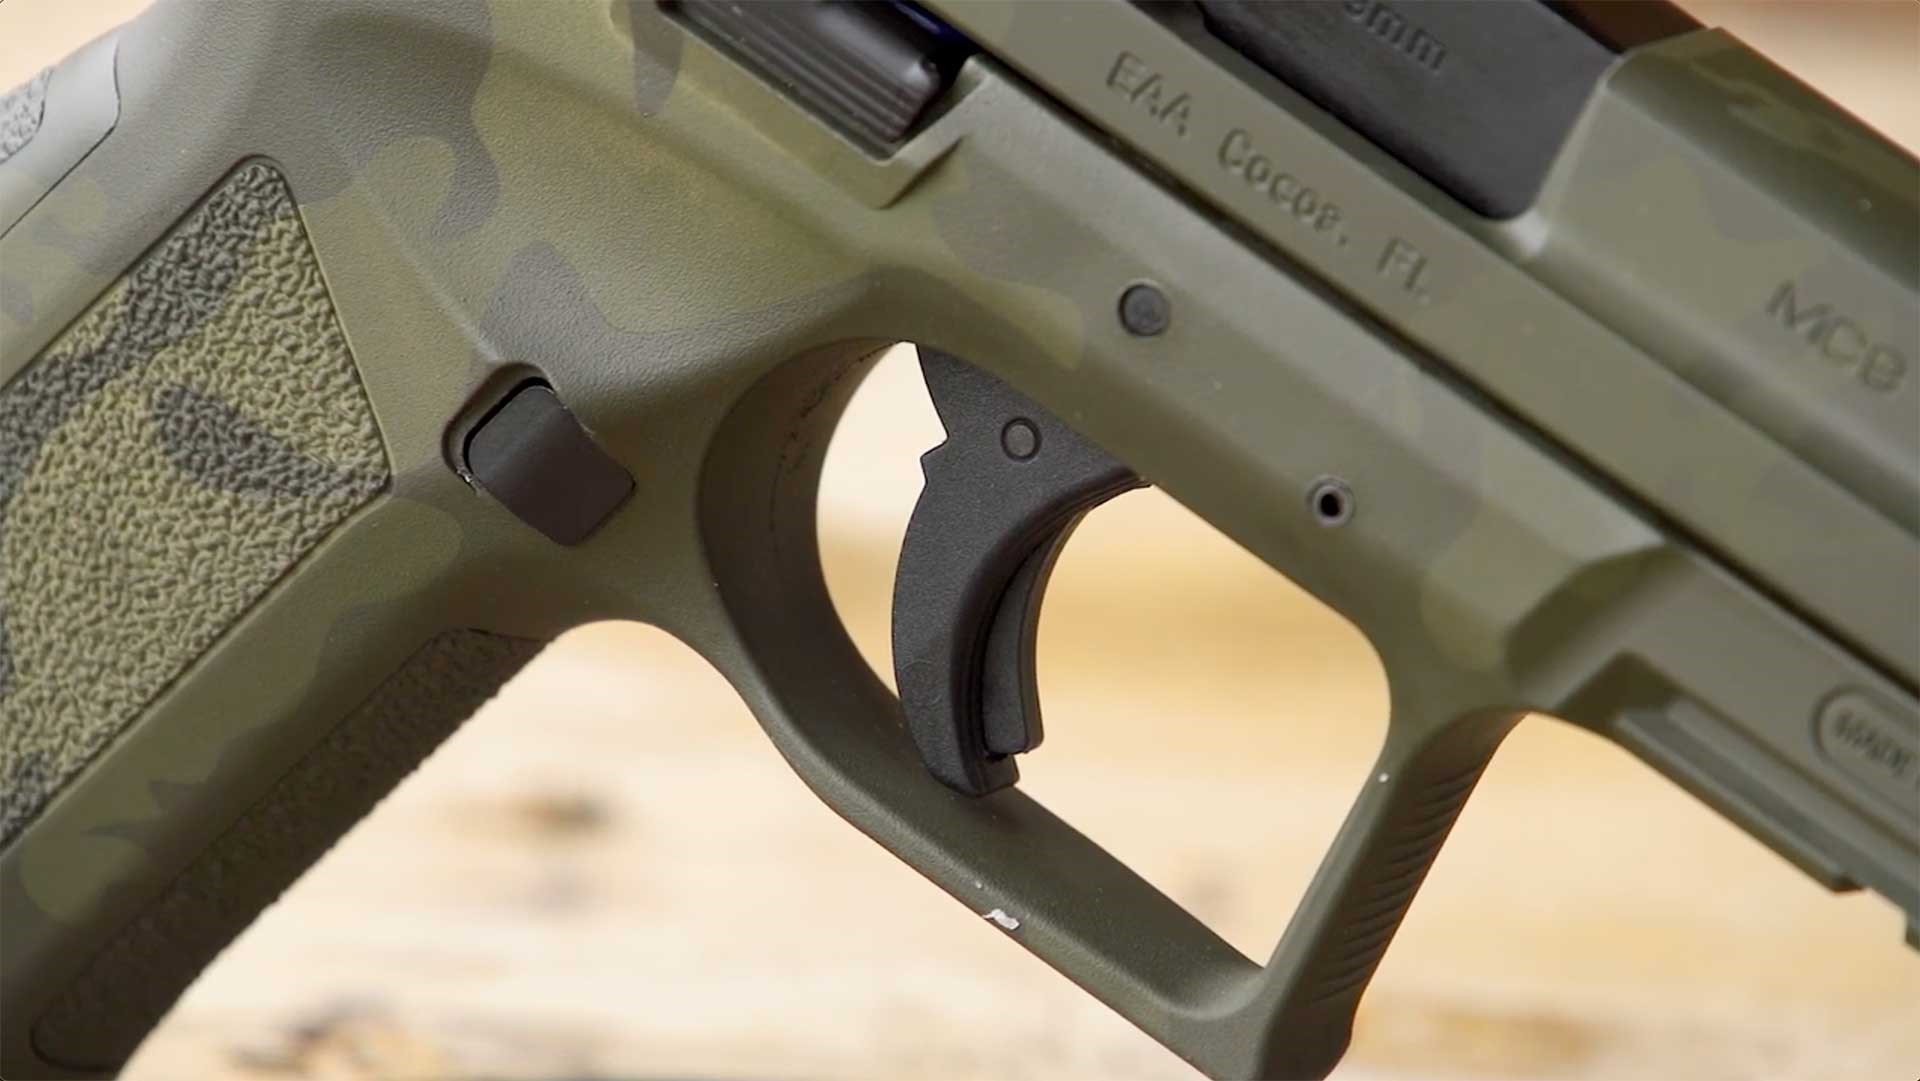 A black trigger blade sits inside the trigger guard of the camouflage-finished EAA Girsan MC9 Disruptor.